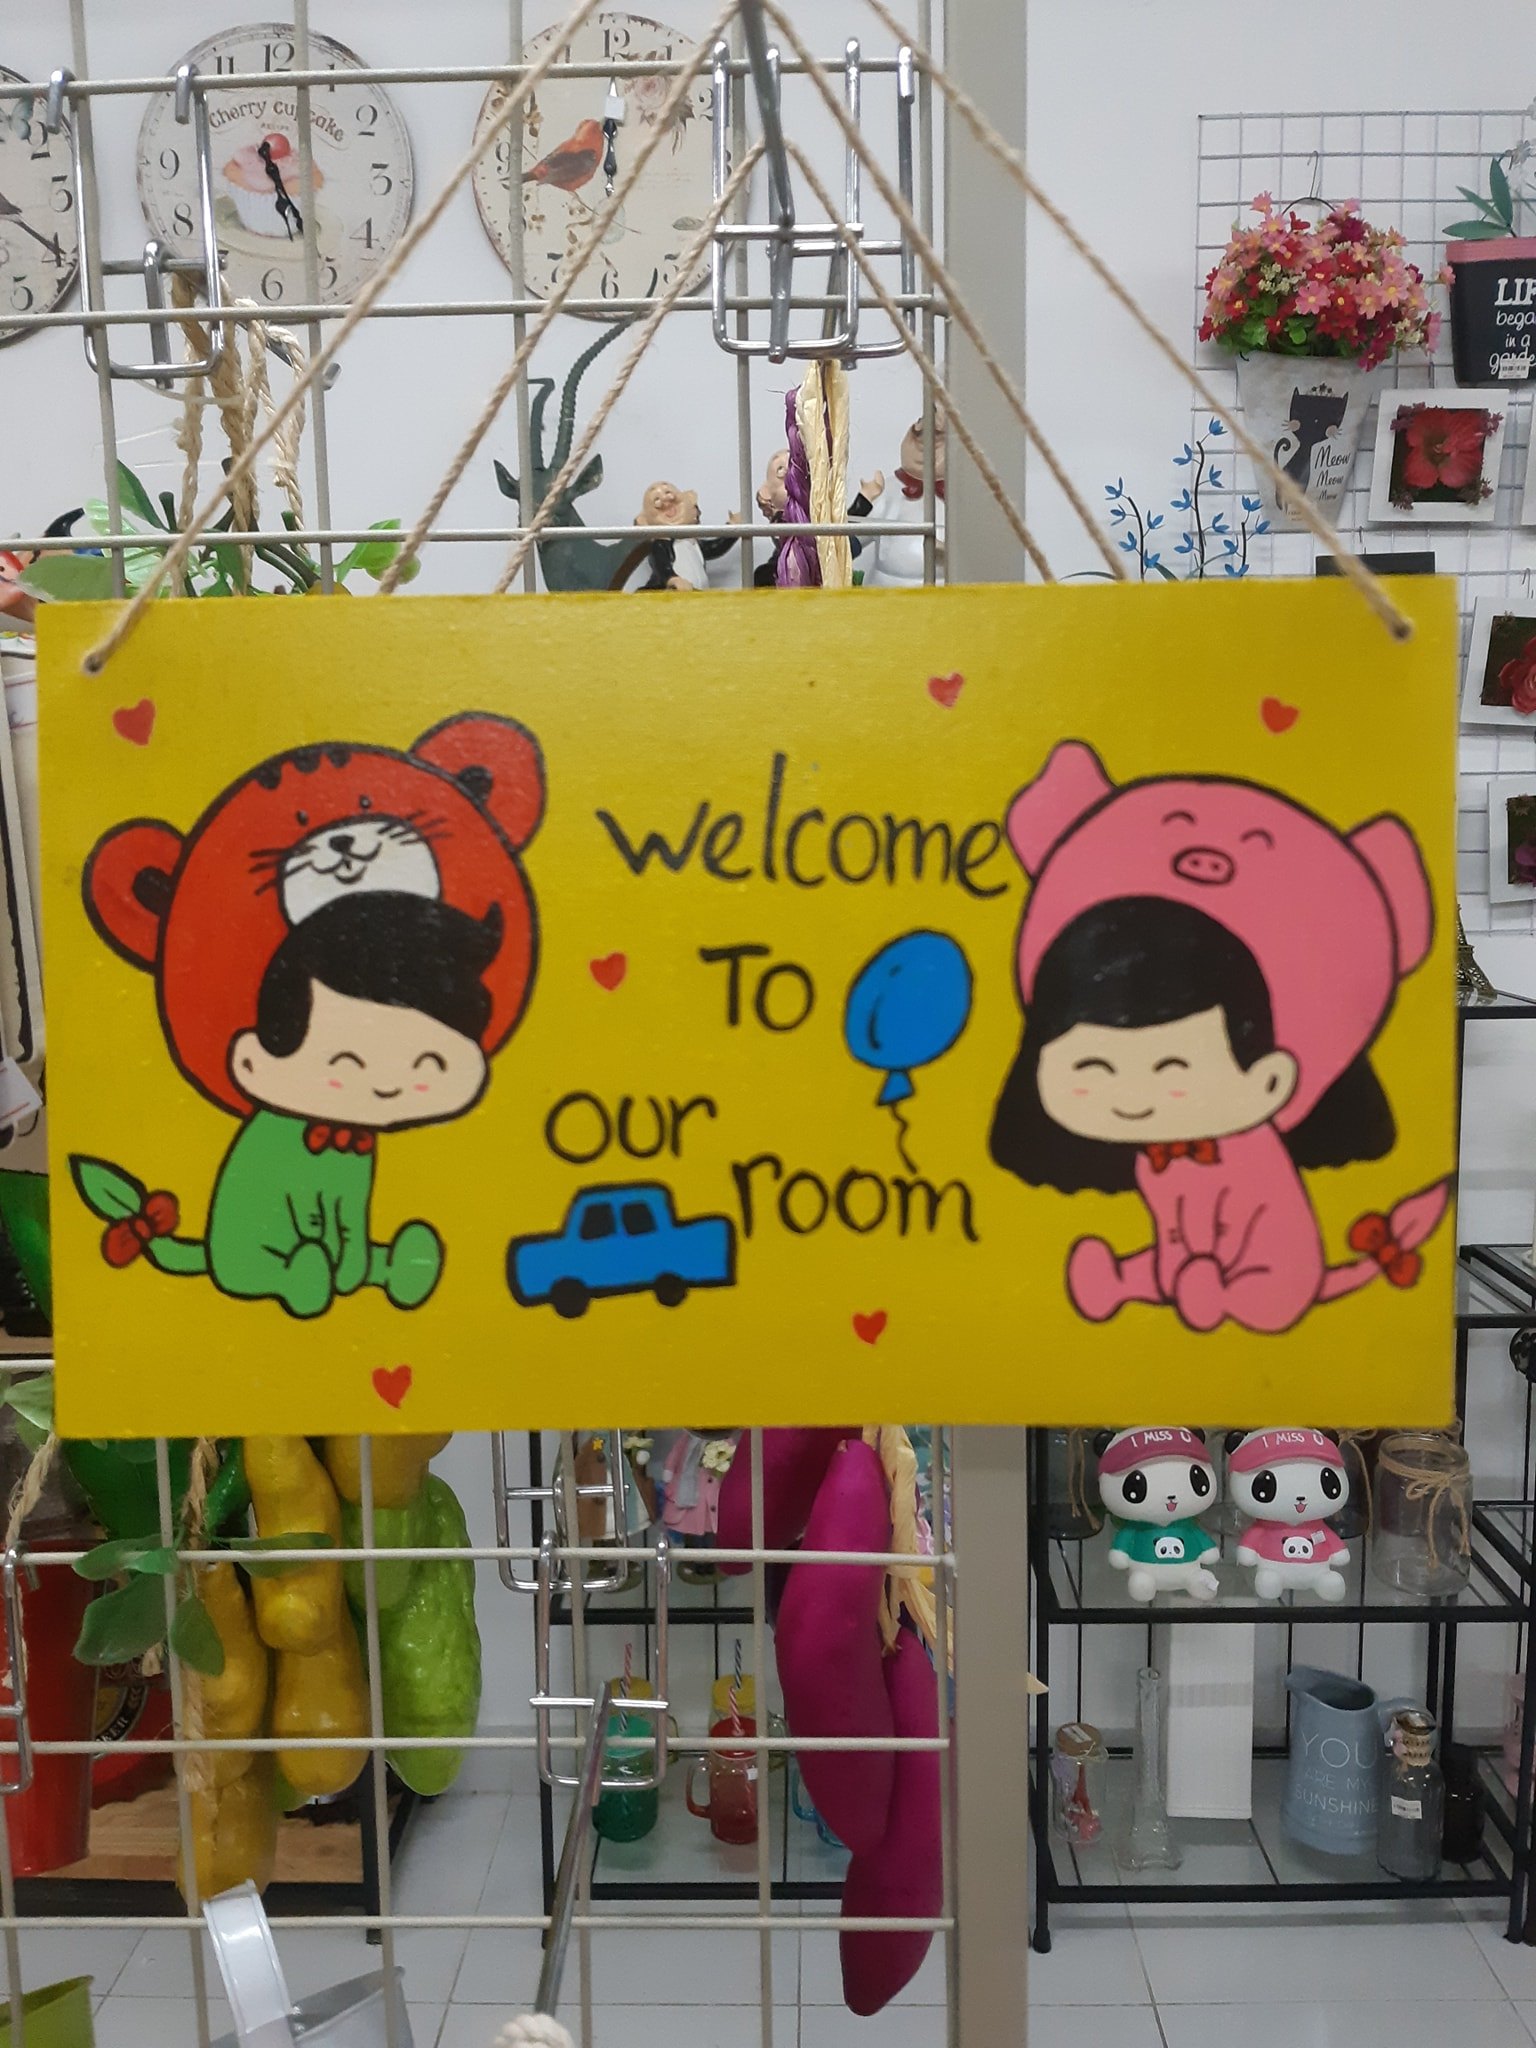 Bảng gỗ "welcome to our room" hổ&heo